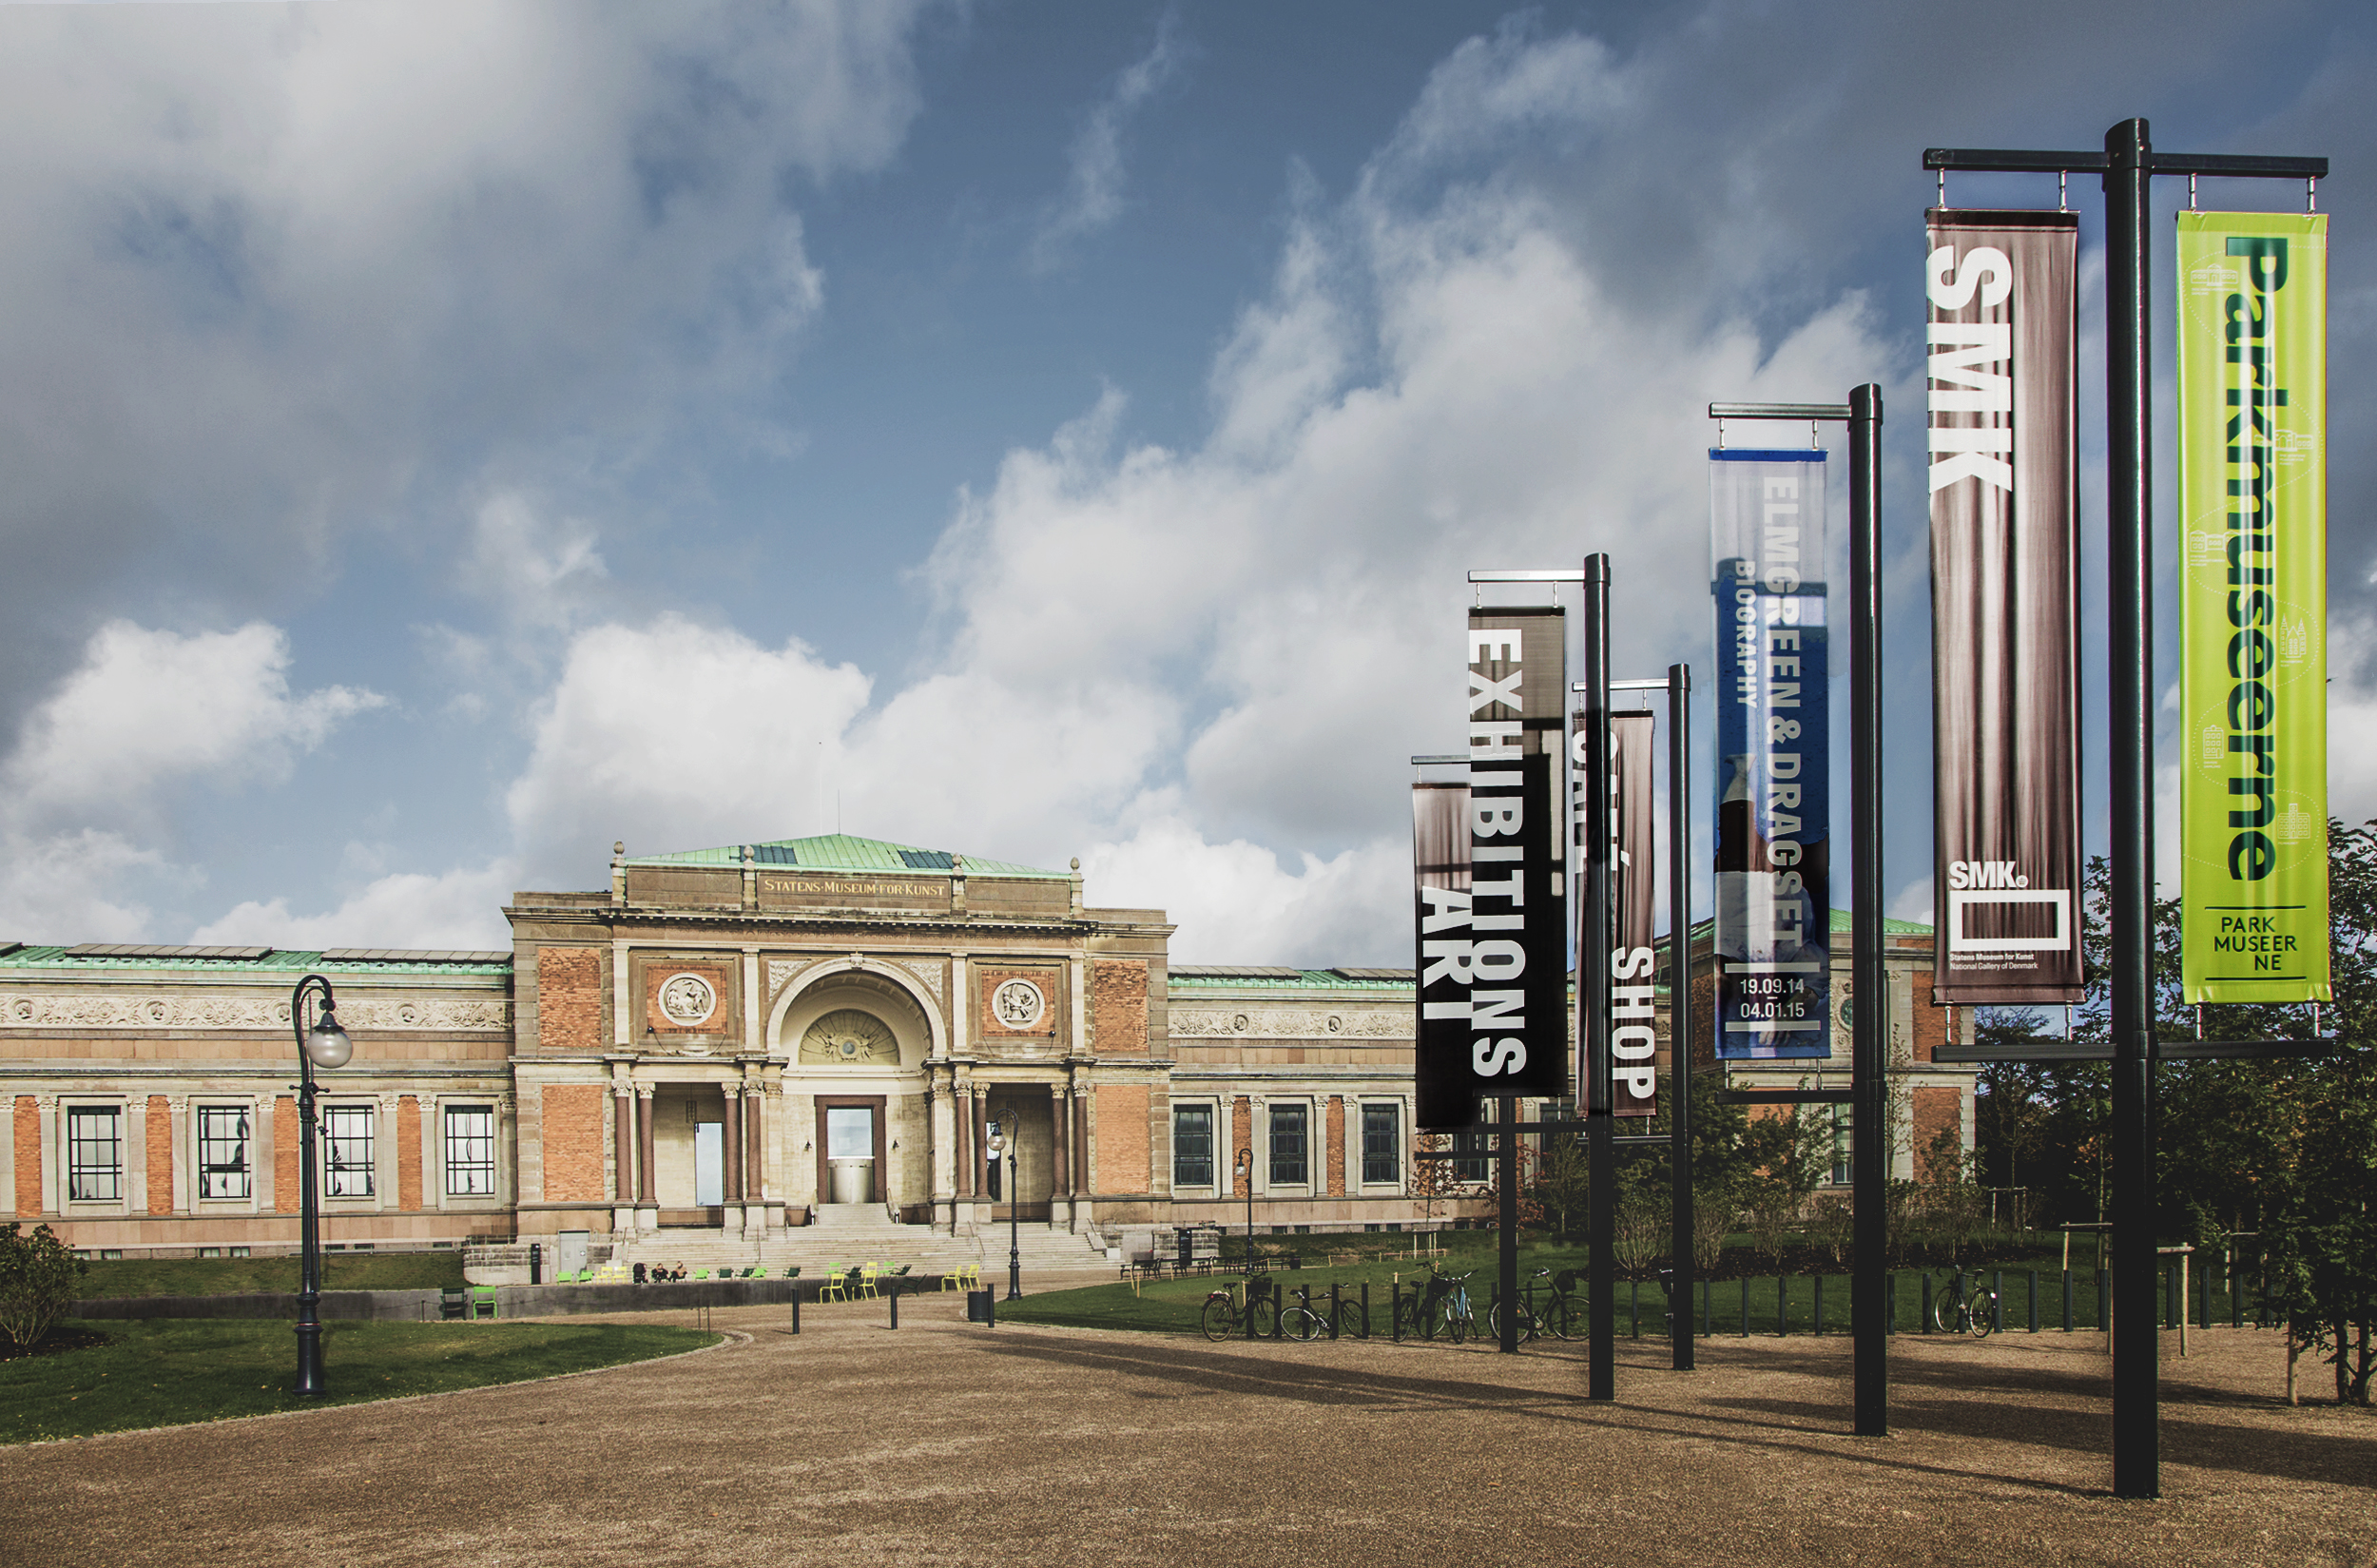 A photograph of the front of the SMK building, with a blue sky above and banners promotion exhibits. SMK - The National Gallery of Denmark by SMK Statens Museum for Kunst, CC BY 2.0
